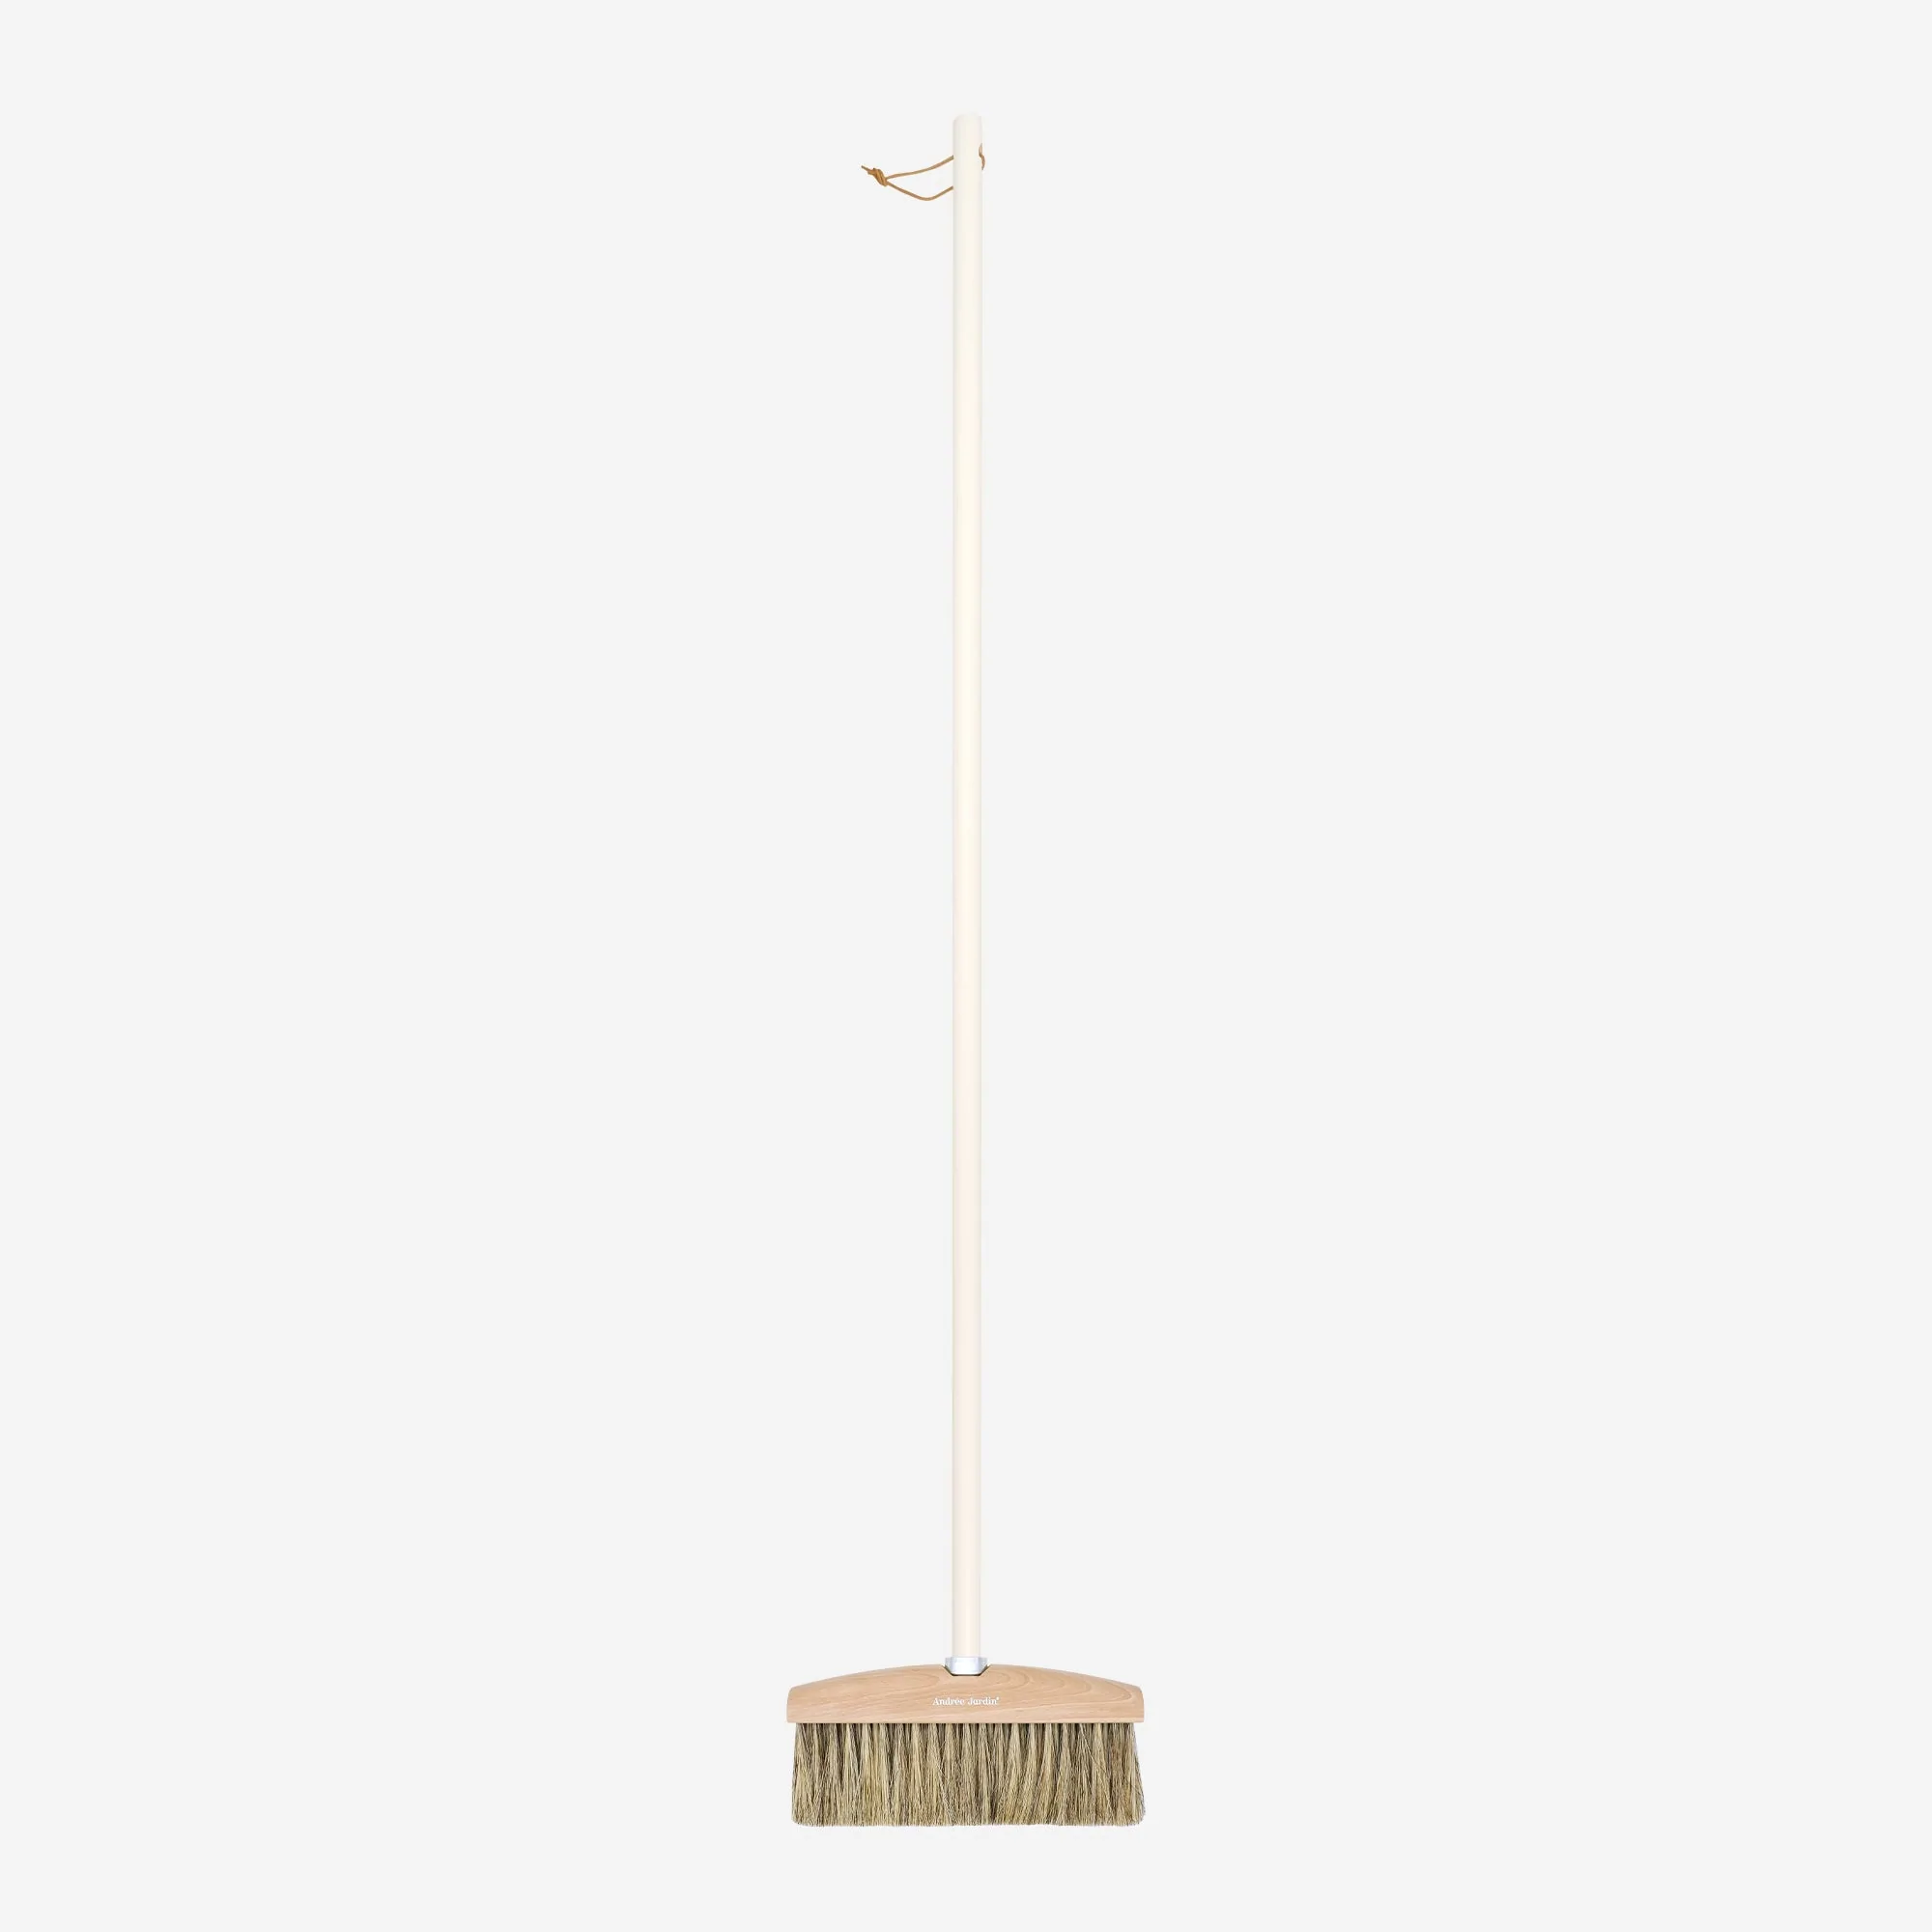 Andrée Jardin Mr. and Mrs. Clynk Natural Broom Head Broom Heads Andrée Jardin Brand_Andrée Jardin Home_Broom Sets Home_Household Cleaning La Maison Summer Clean Up balai-clynk-nature-3102-blanc_AndreeJardinMr.andMrs.ClynkNaturalBroomHead_2000x2000_d8cd2678-7b07-4e47-b6f7-fd1095f96276